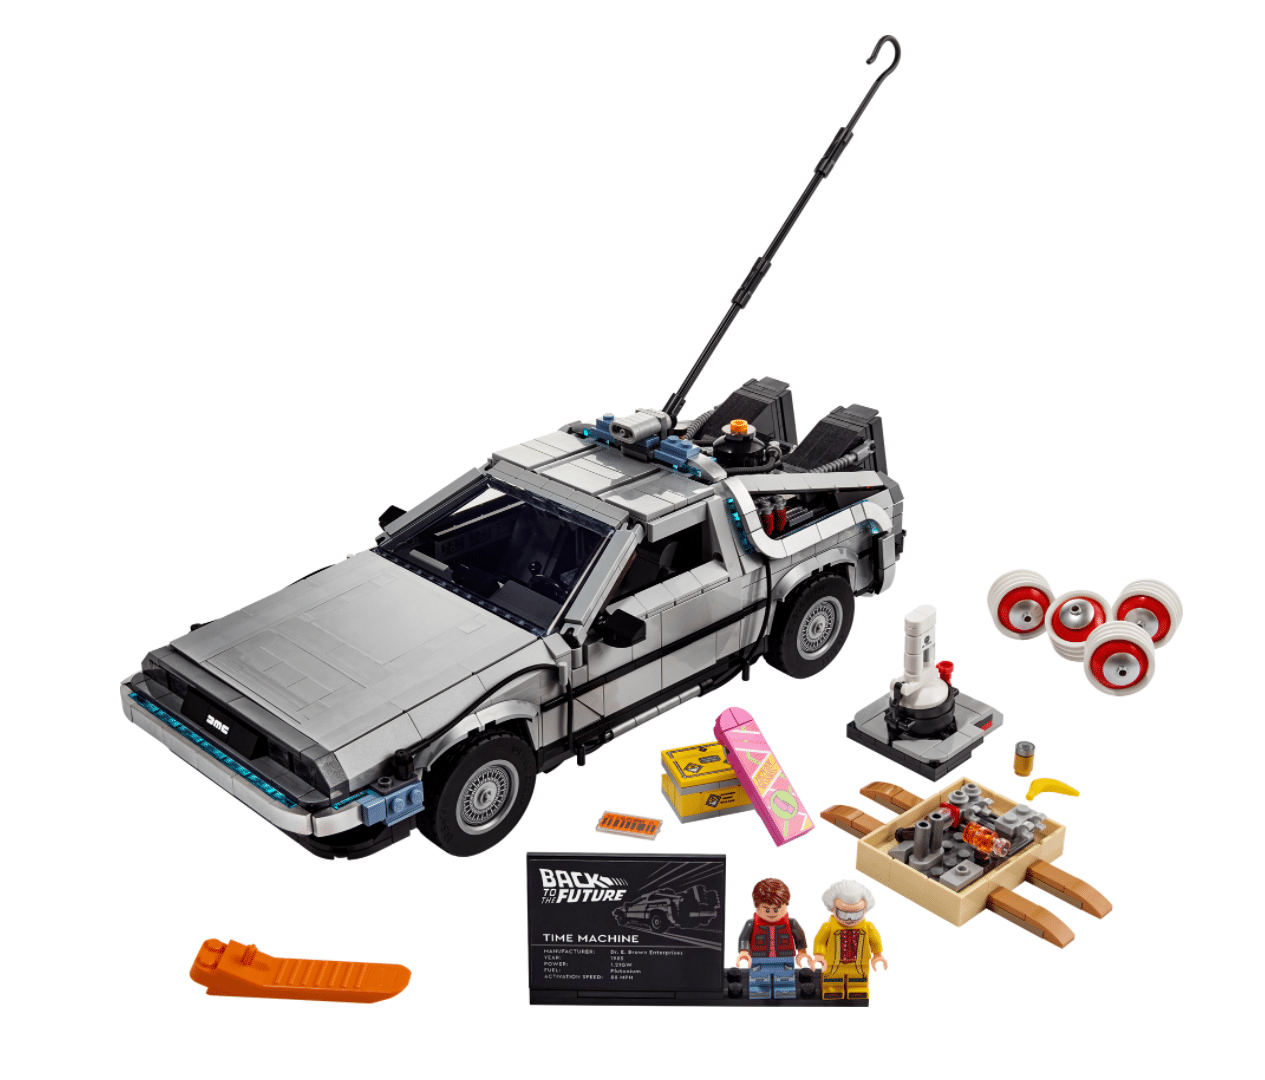 The Back to the Future Lego set features more than 1,800 pieces.